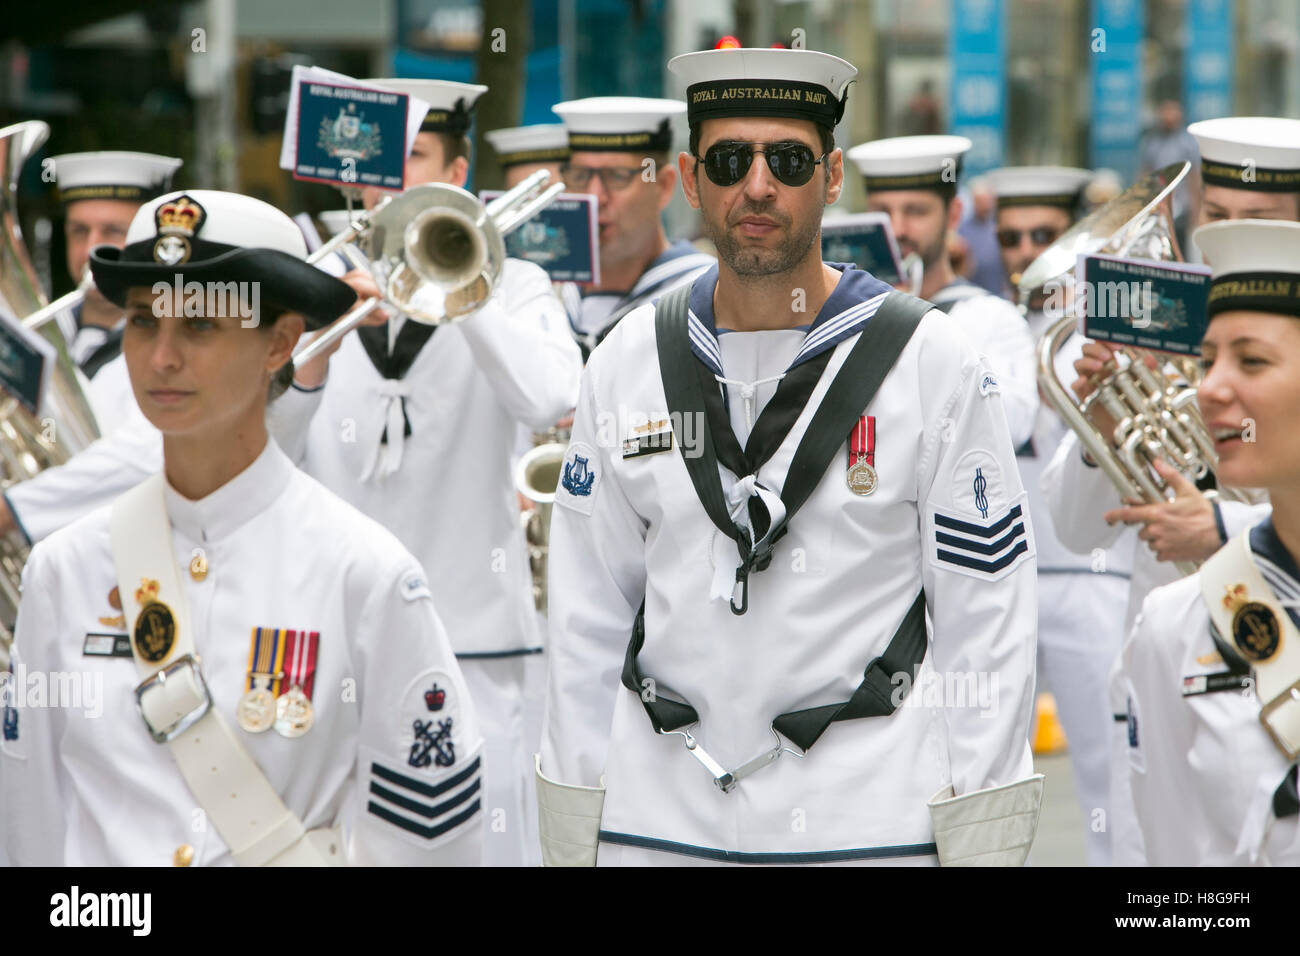 Australian Navy Uniform High Resolution Stock Photography and Images - Alamy